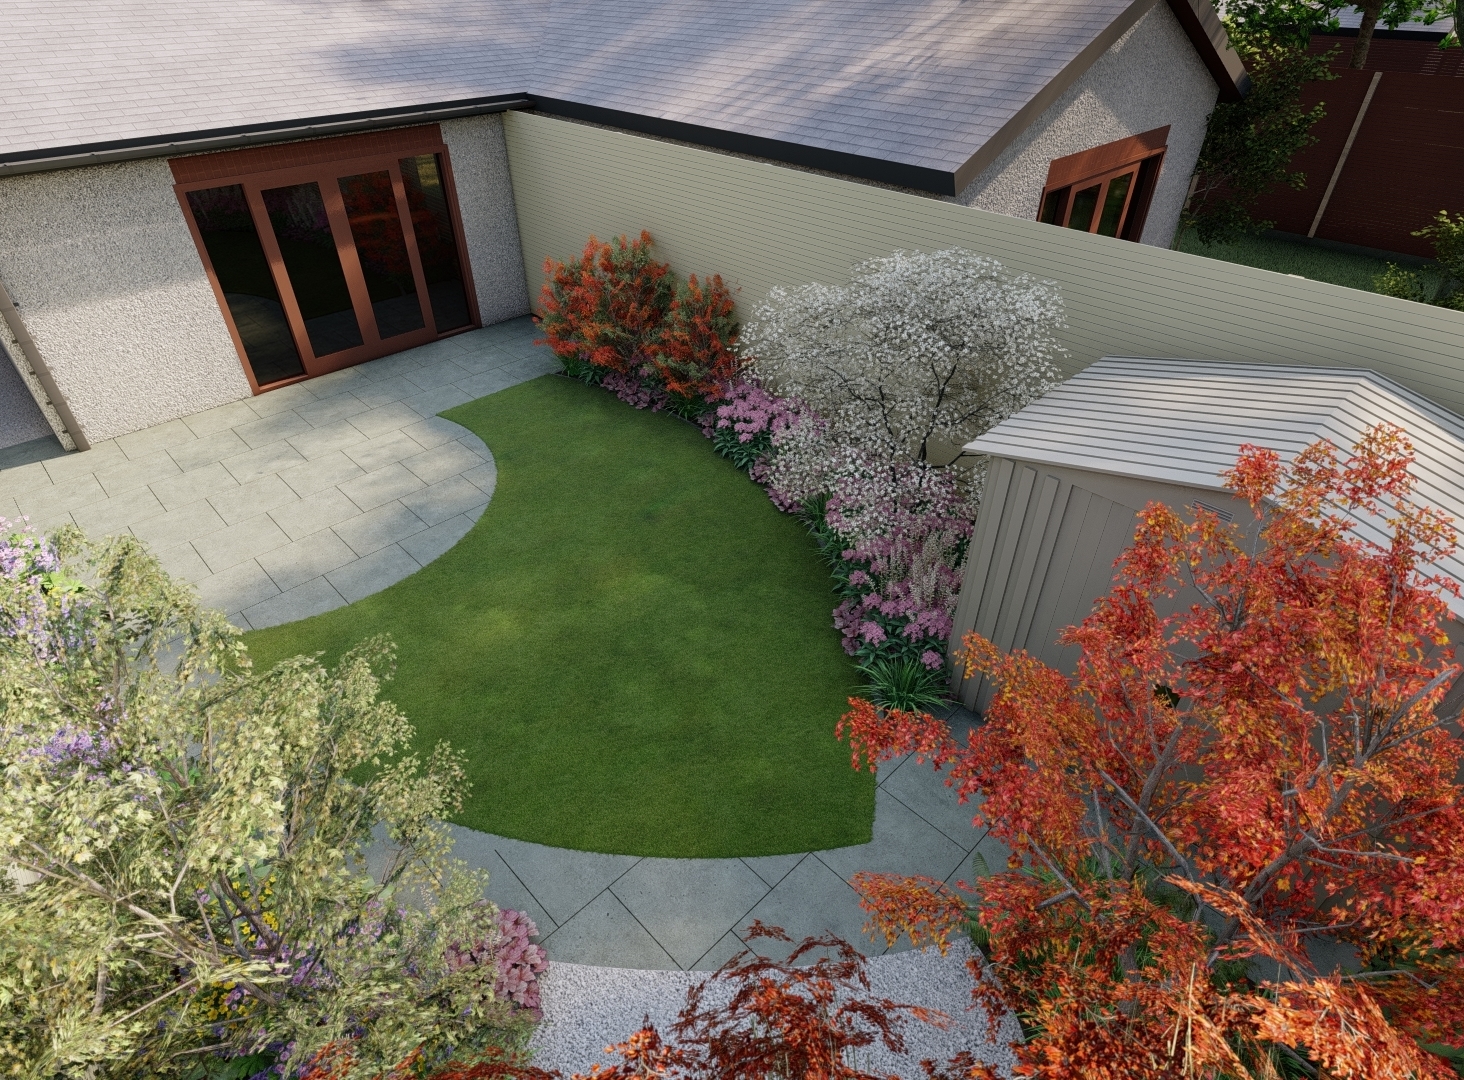 Design Visual for small garden featuring Biohort Shed, Bespoke Garden Fencing, sweeping Limestone pathway, roll turf grass area, Specimen trees and Limestone Patio